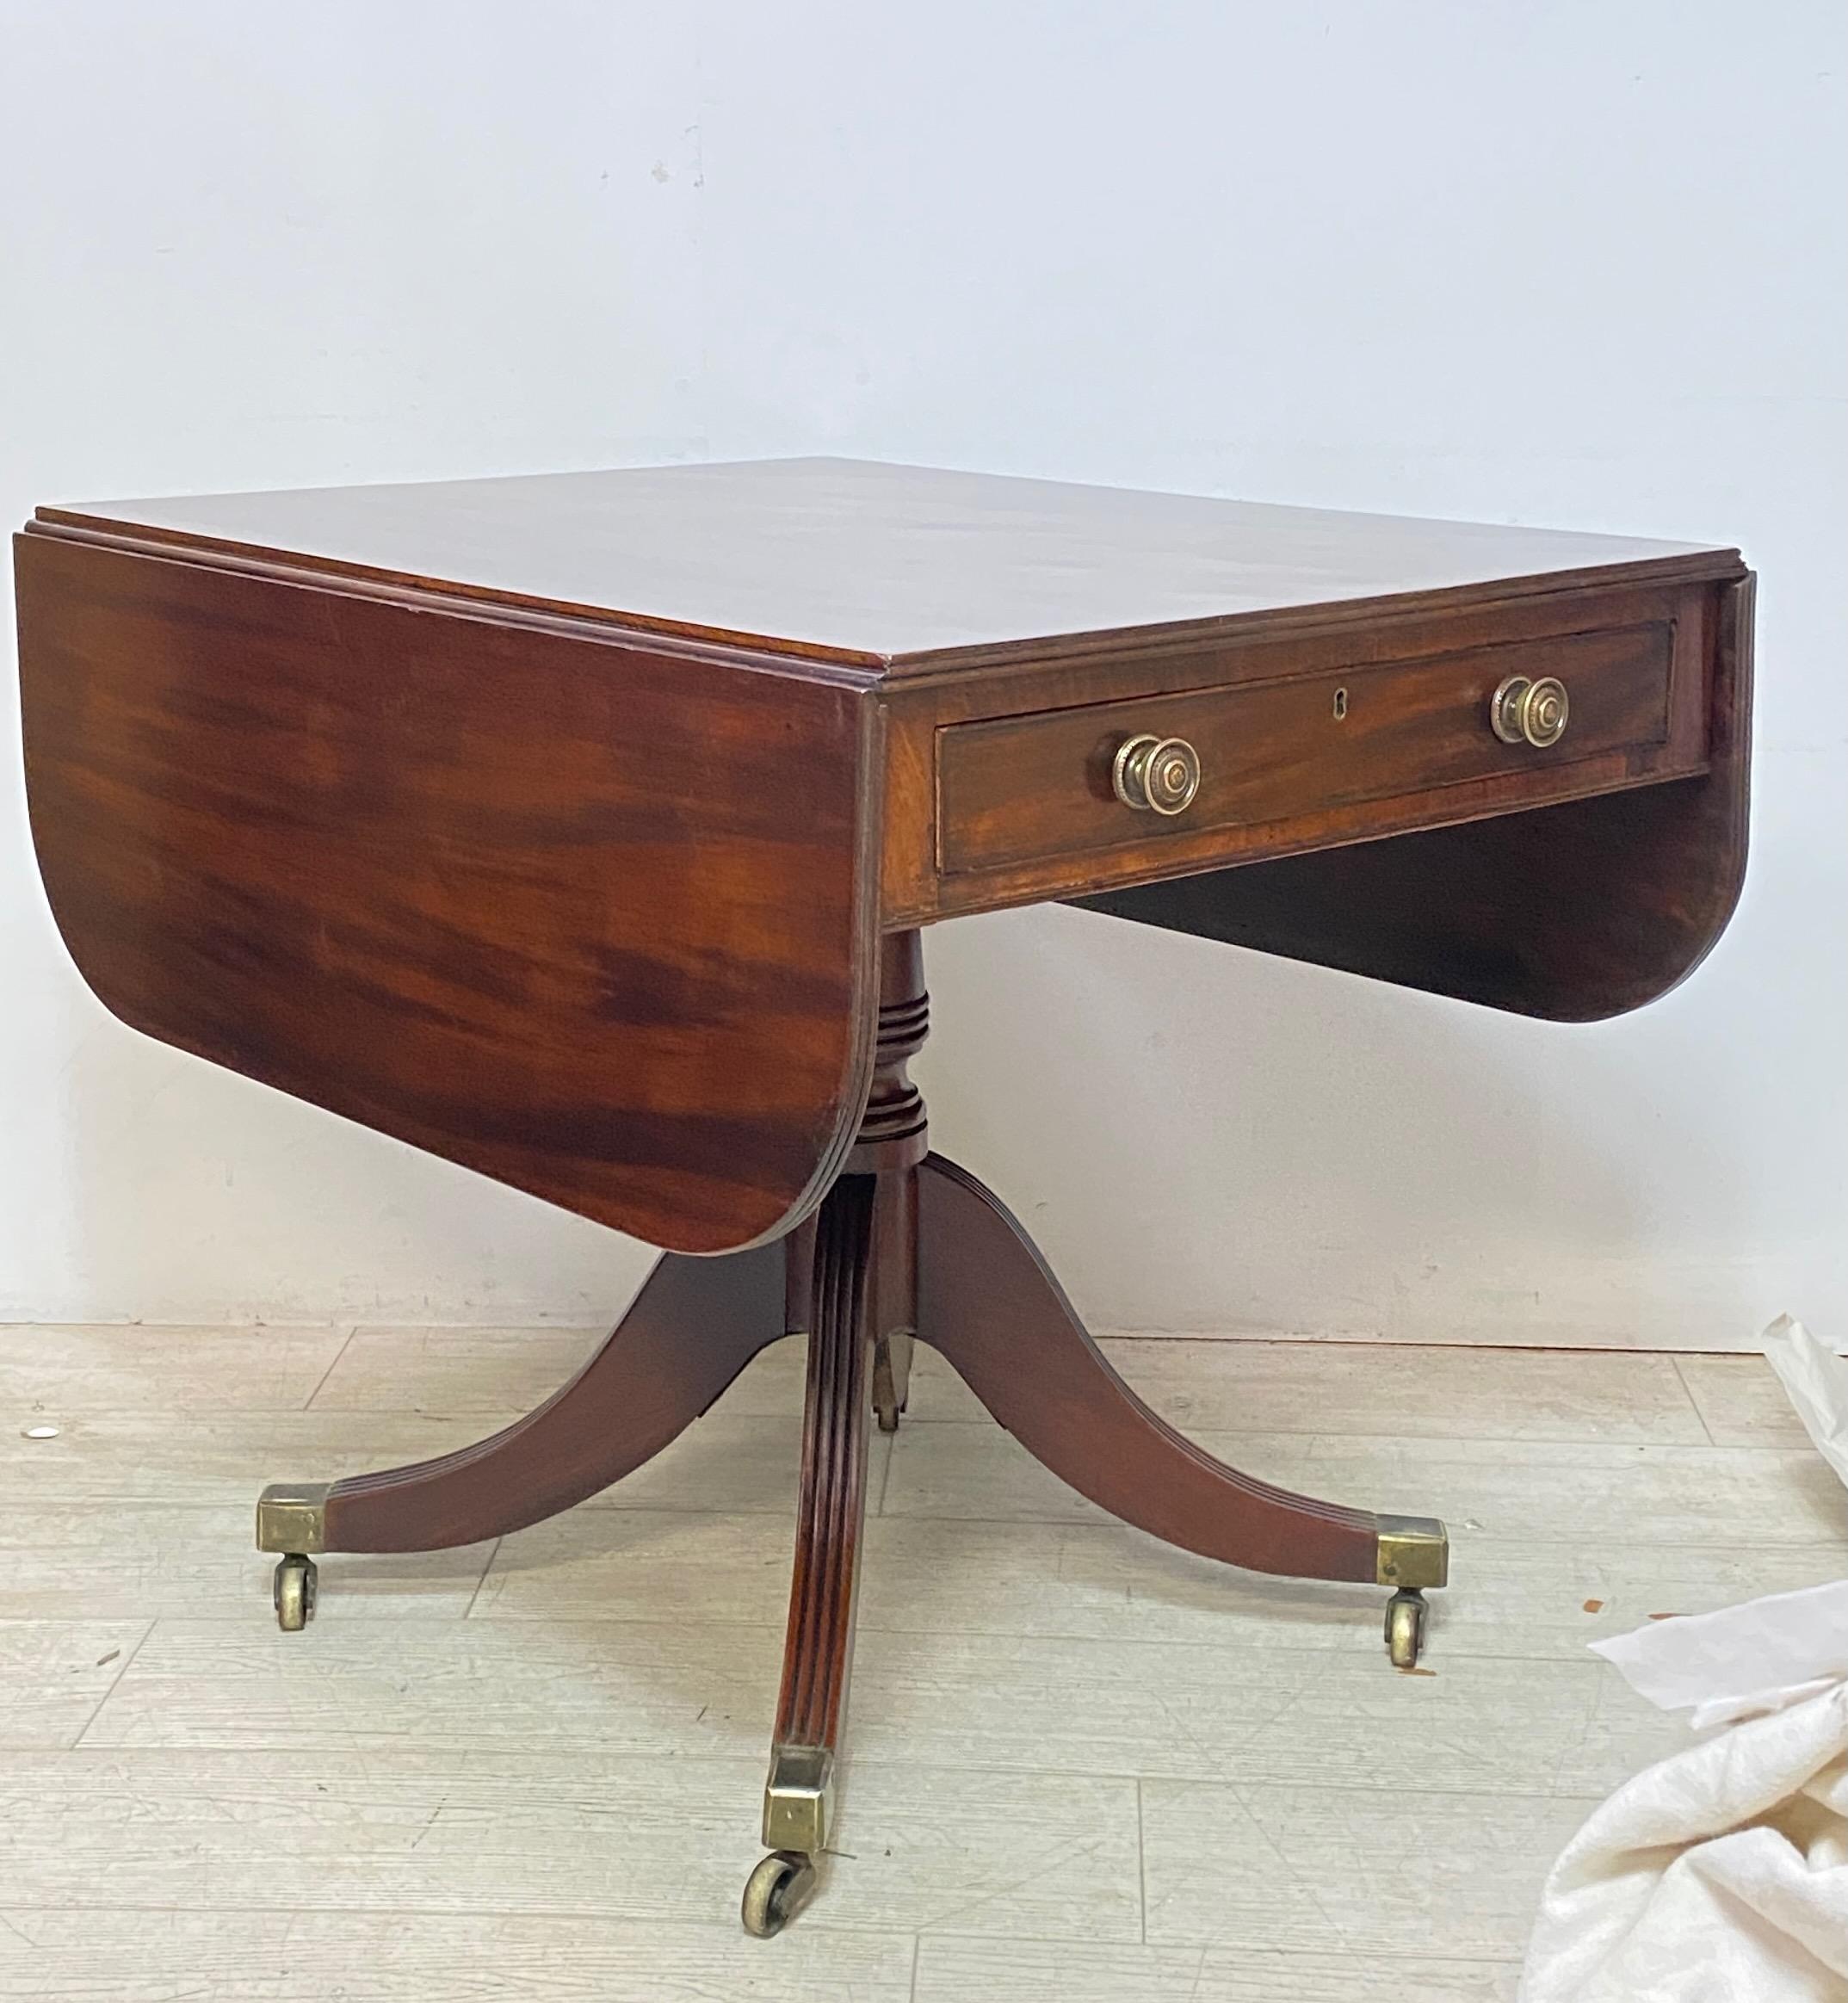 Early 19th century English George III period mahogany Pembroke style drop leaf side table or breakfast table. Having a single drawer and a false drawer on the back end. In excellent original condition accept for the top that looks to have been